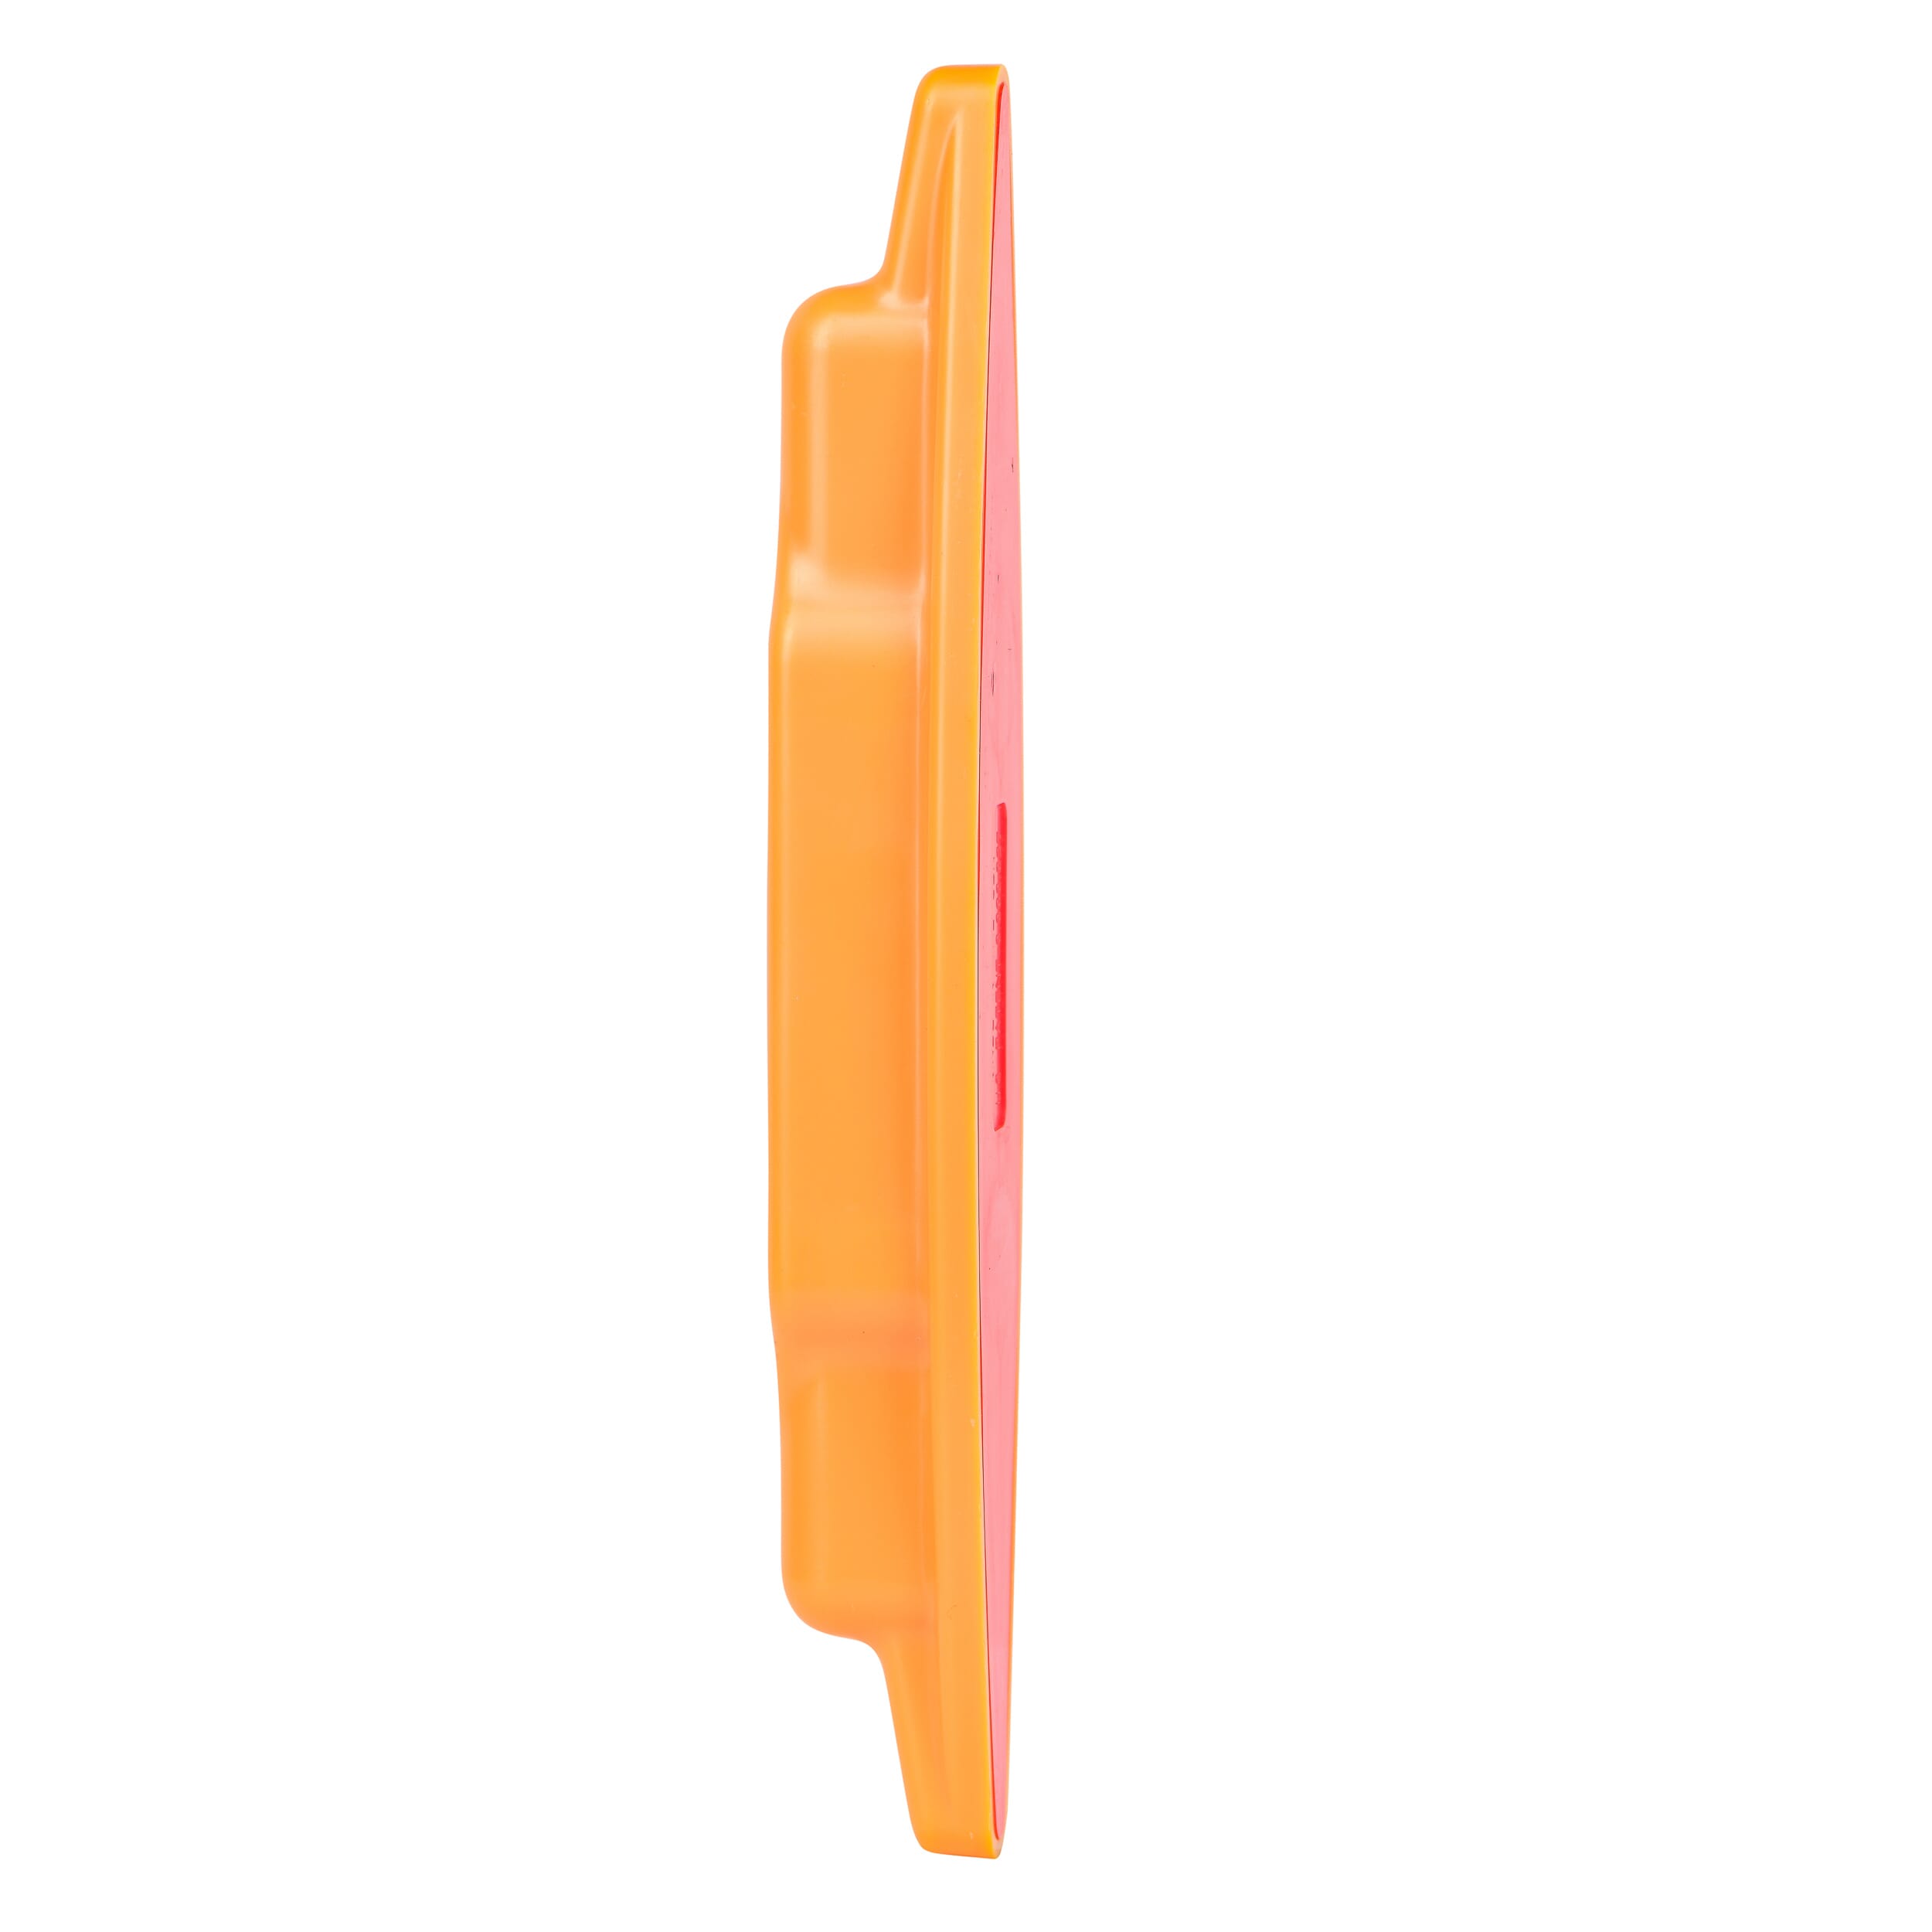 The StudBuddy 000107 Stud Finder, Detectable Material: Me